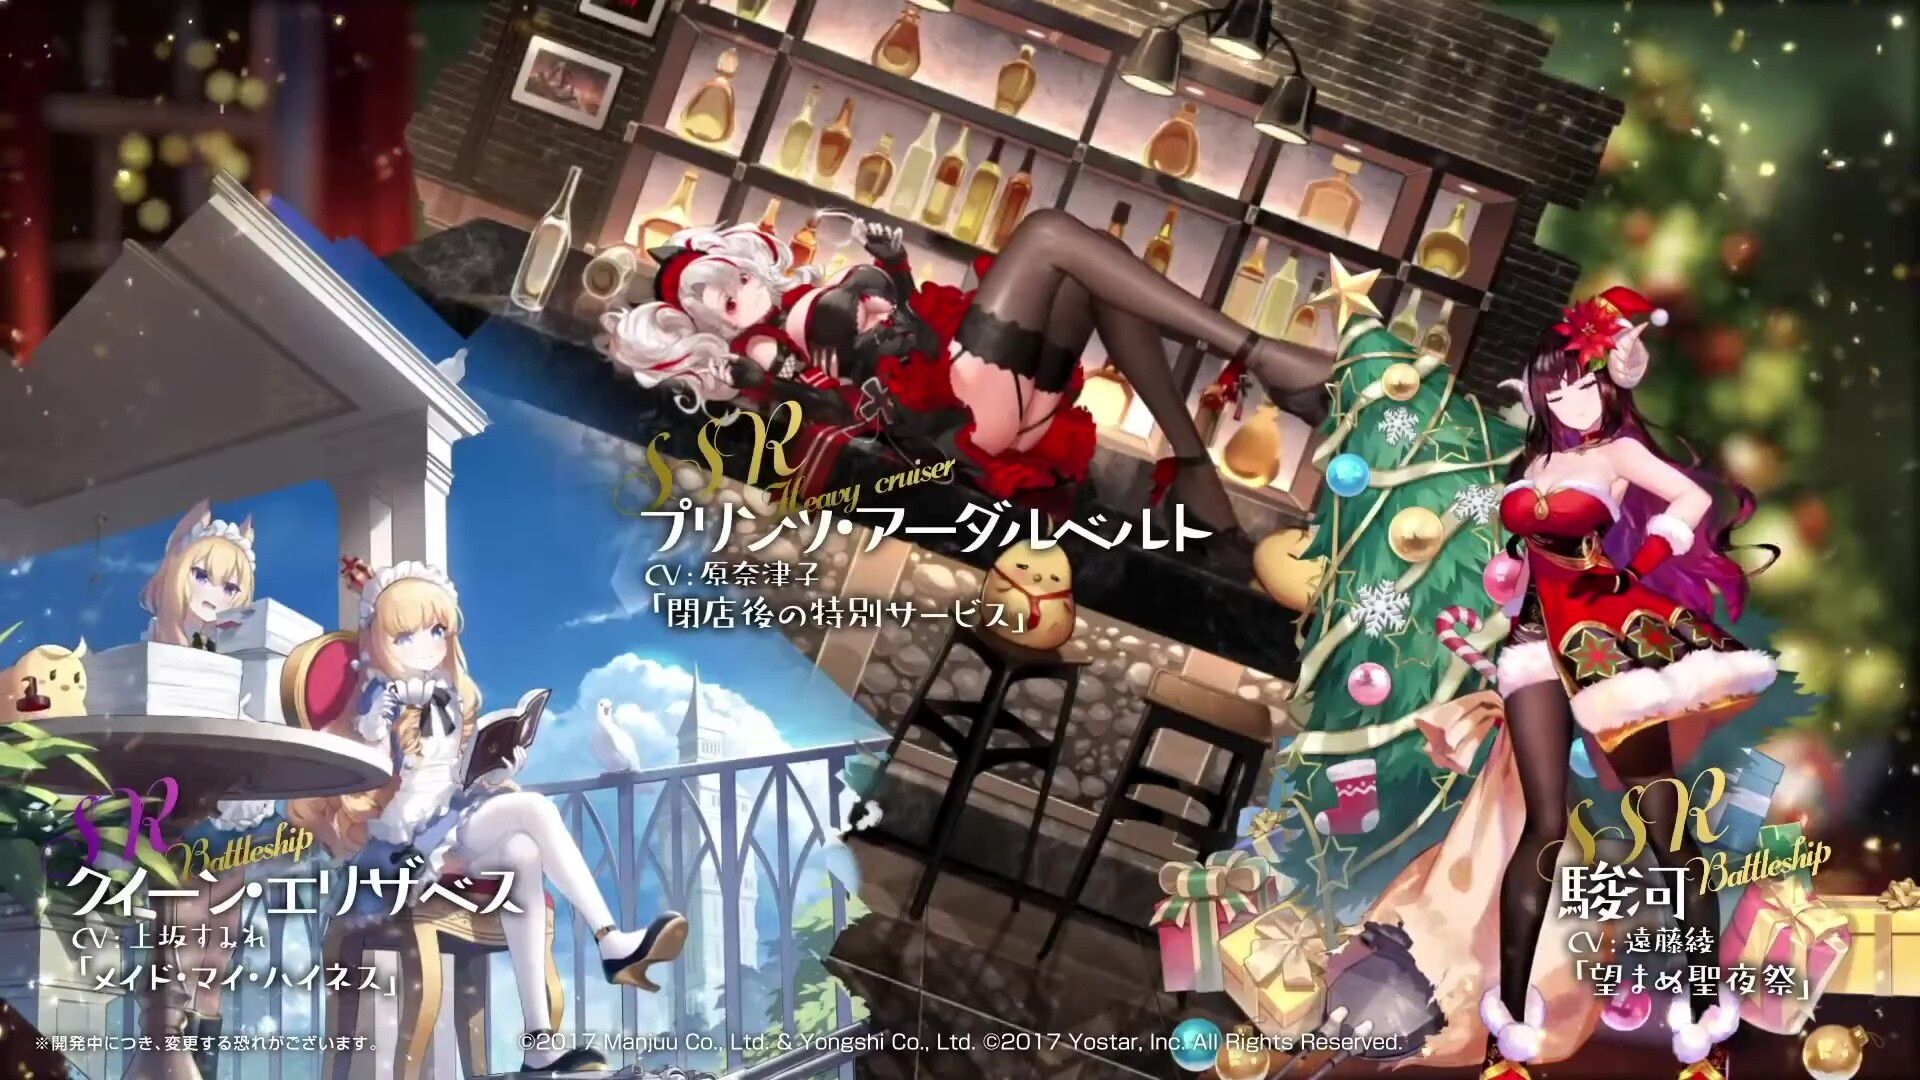 Erotic costumes such as "Azur Lane" erotic new character, whipmuchiro Santa and whipmuchi erotic maid clothes 29